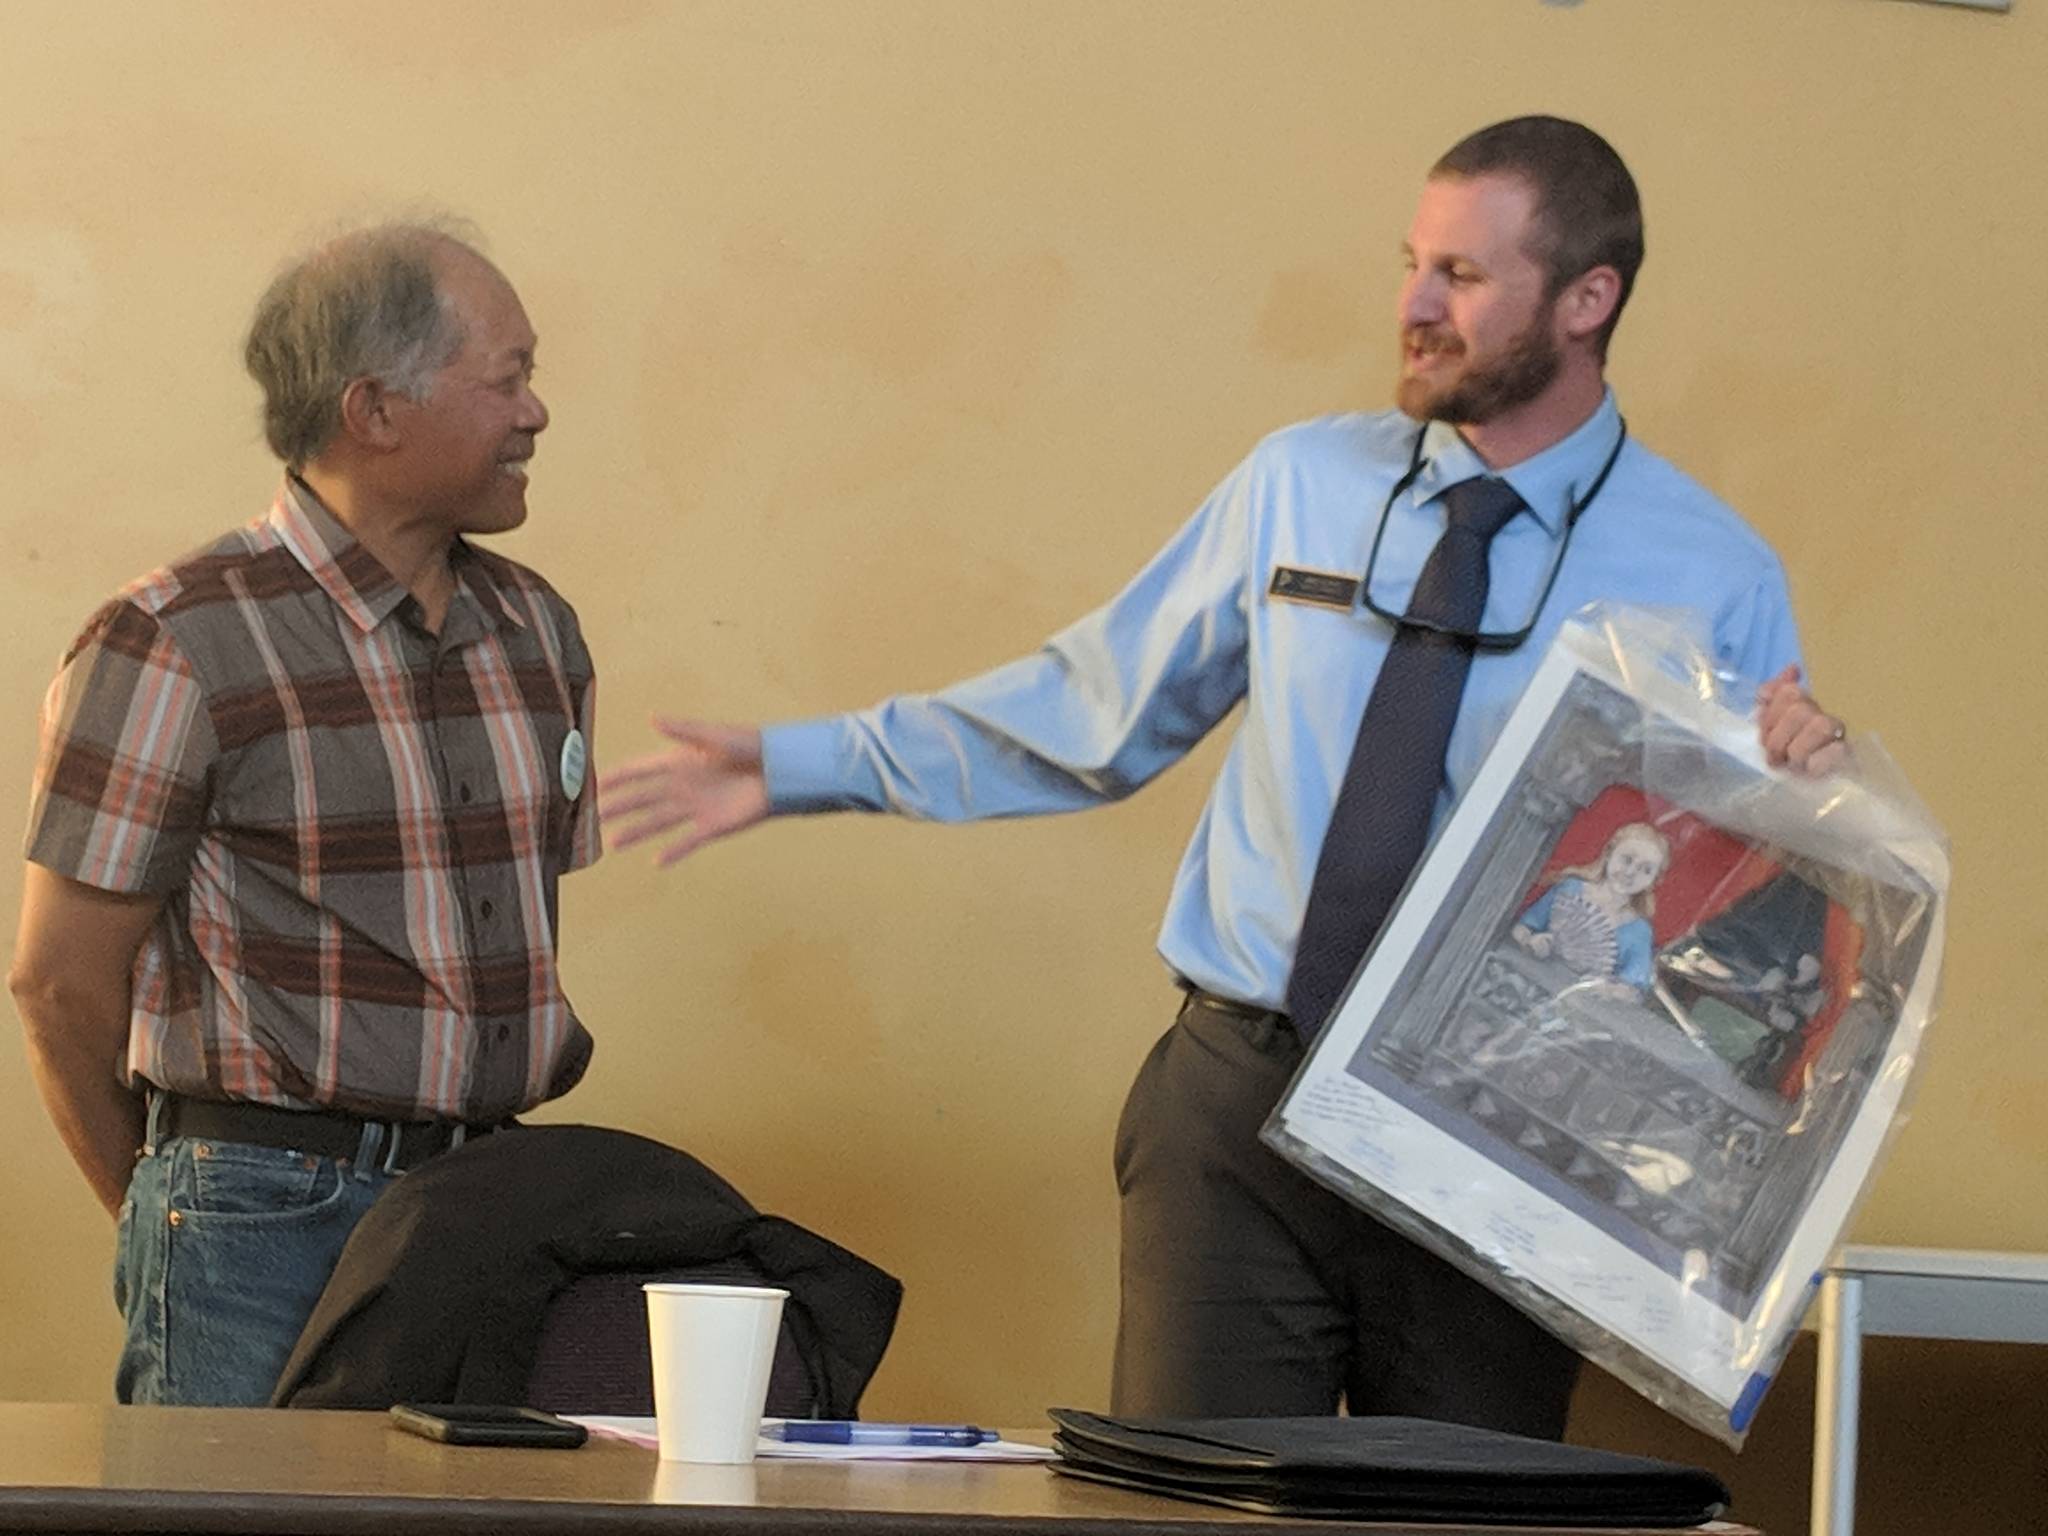 Juneau Arts & Humanities Council Board Vice President Bing Carrillo gifts a piece of art to departing Board President Eric Scott during the JAHC annual meeting. Scott had served as president for three years and said he was feeling loss and melancholy. (Ben Hohenstatt | Capital City Weekly)